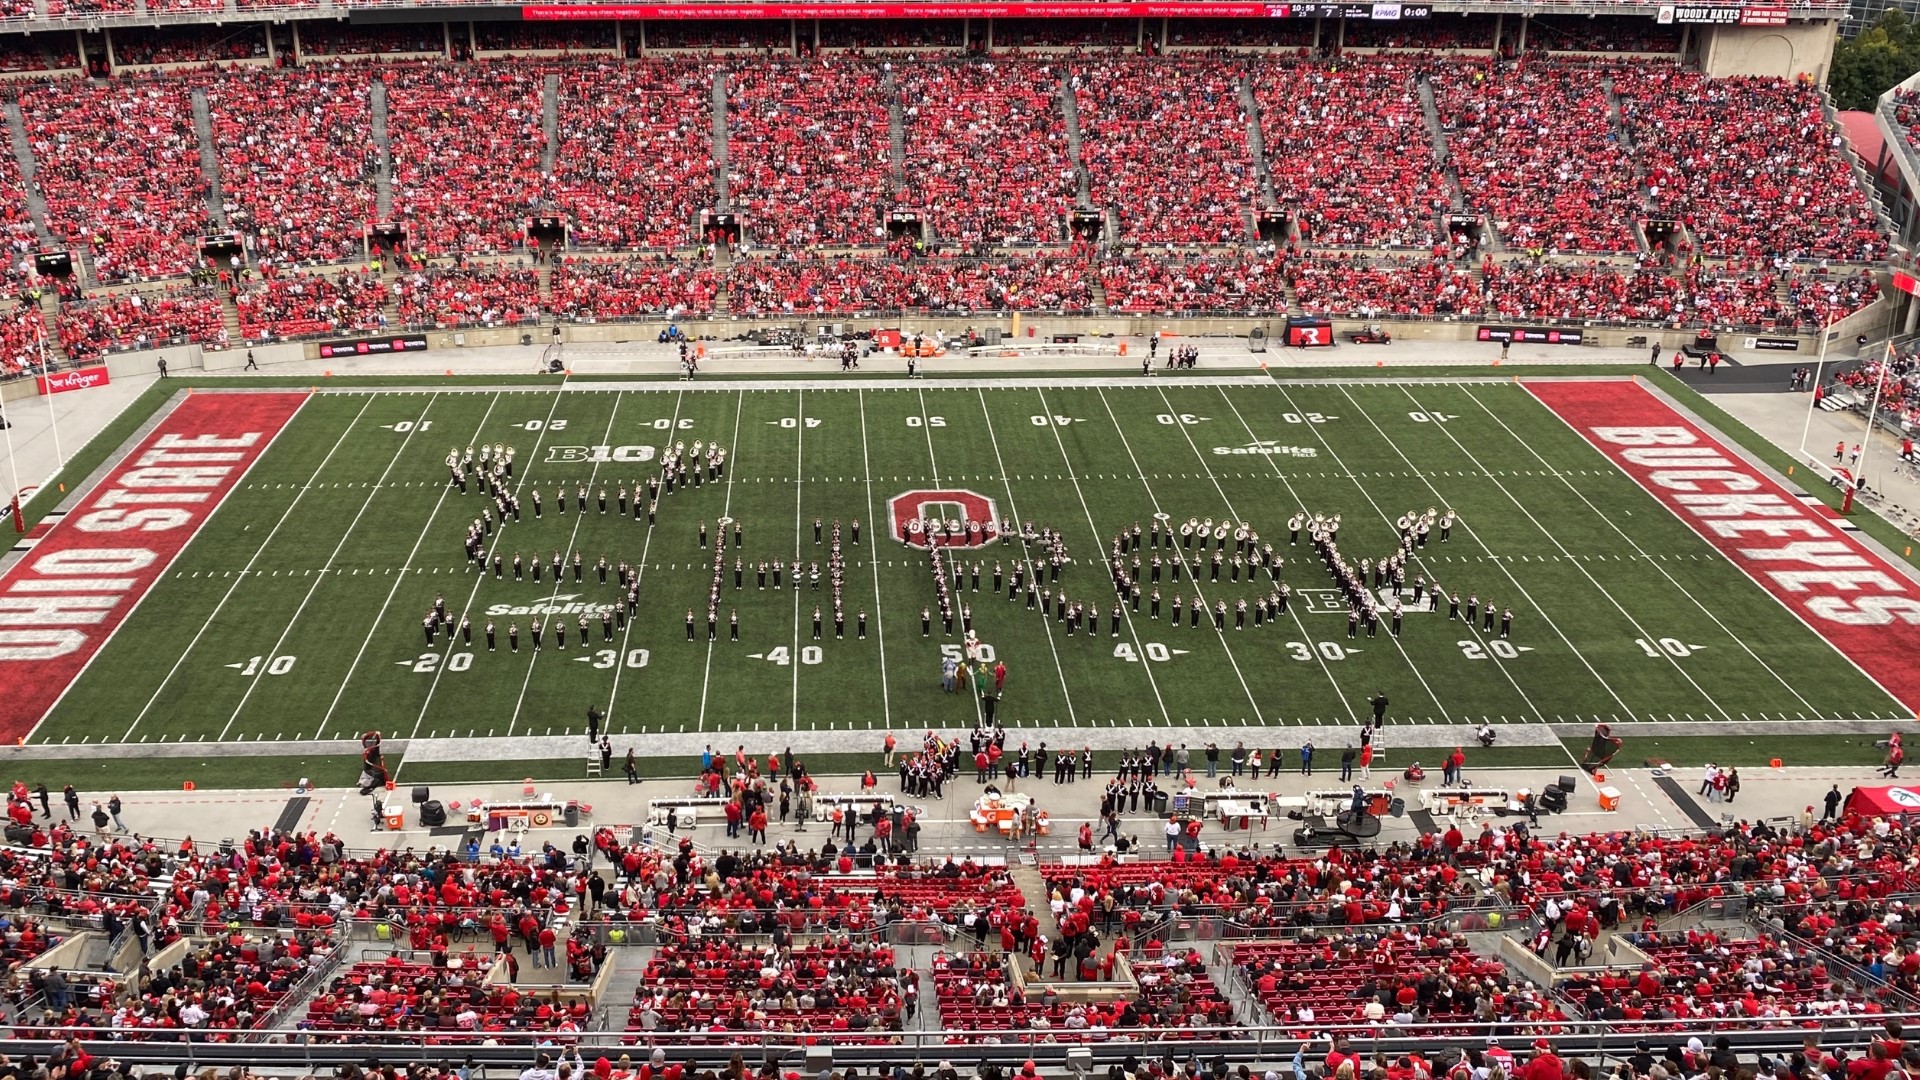 The Ohio State University Marching Band tells the story of an epic battle between good and evil in the Kingdom of Duloc.